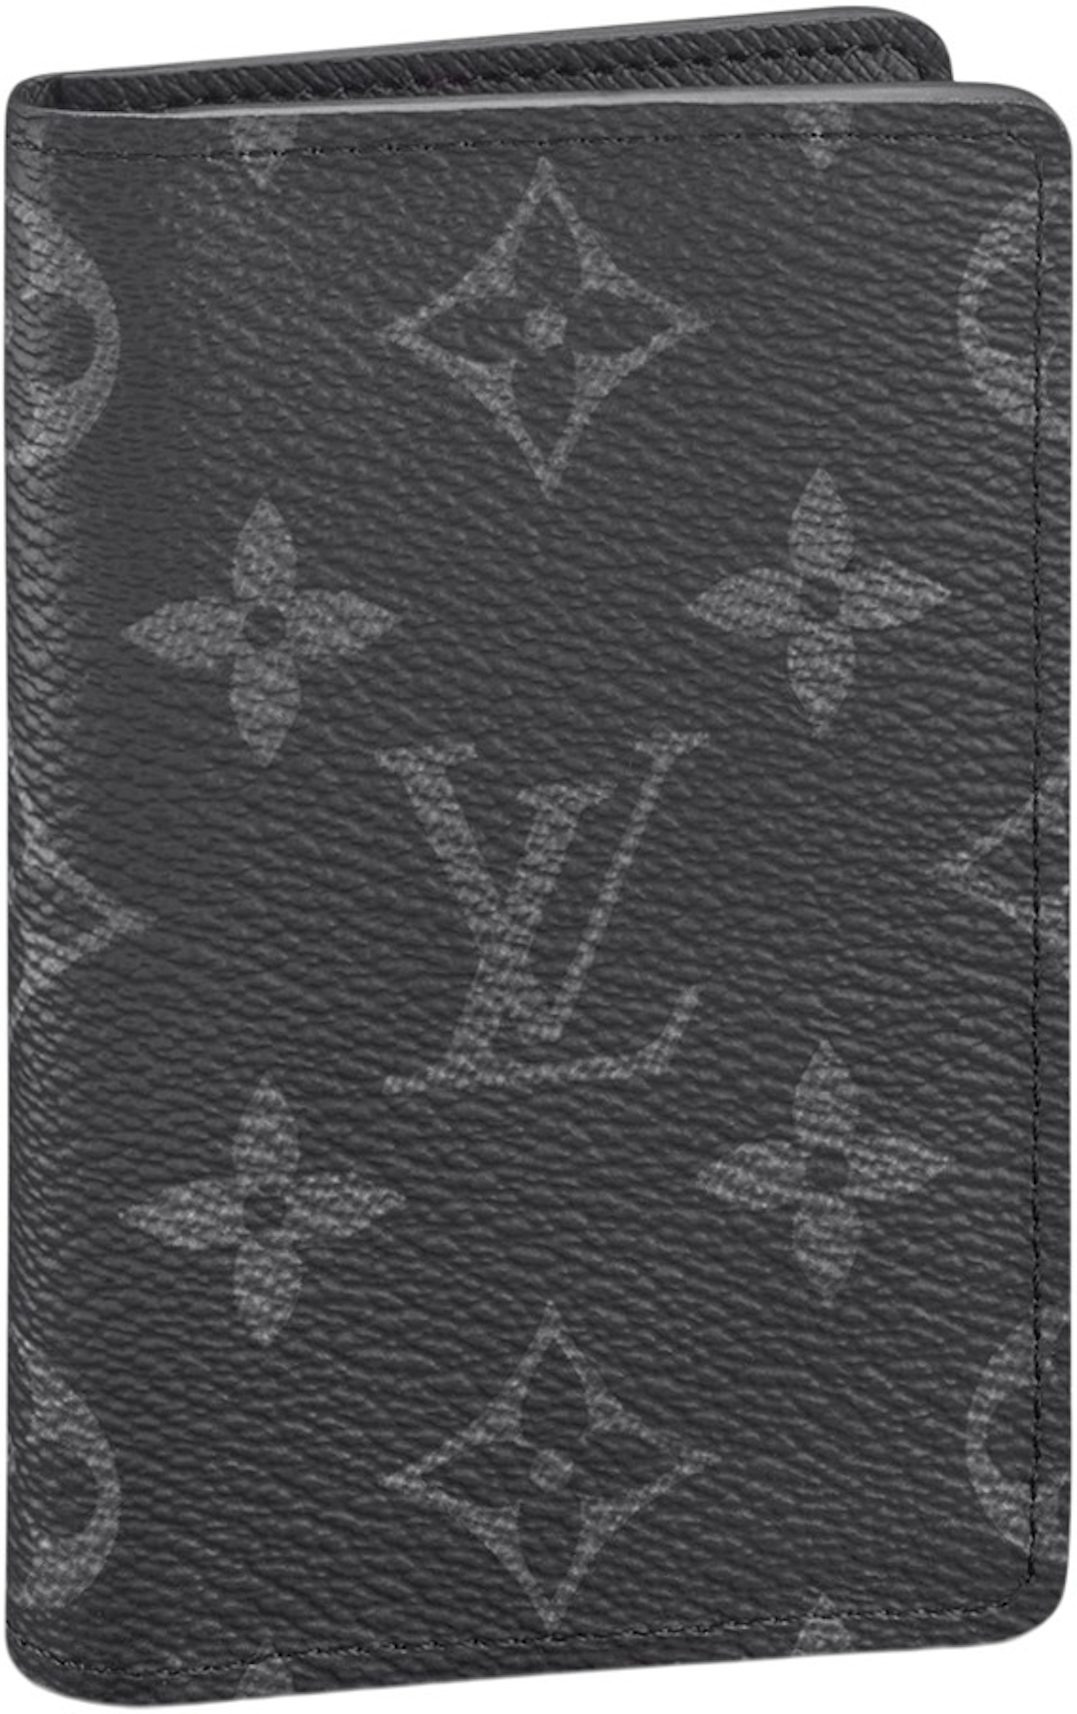 What are your thoughts on this pocket organizer? : r/Louisvuitton